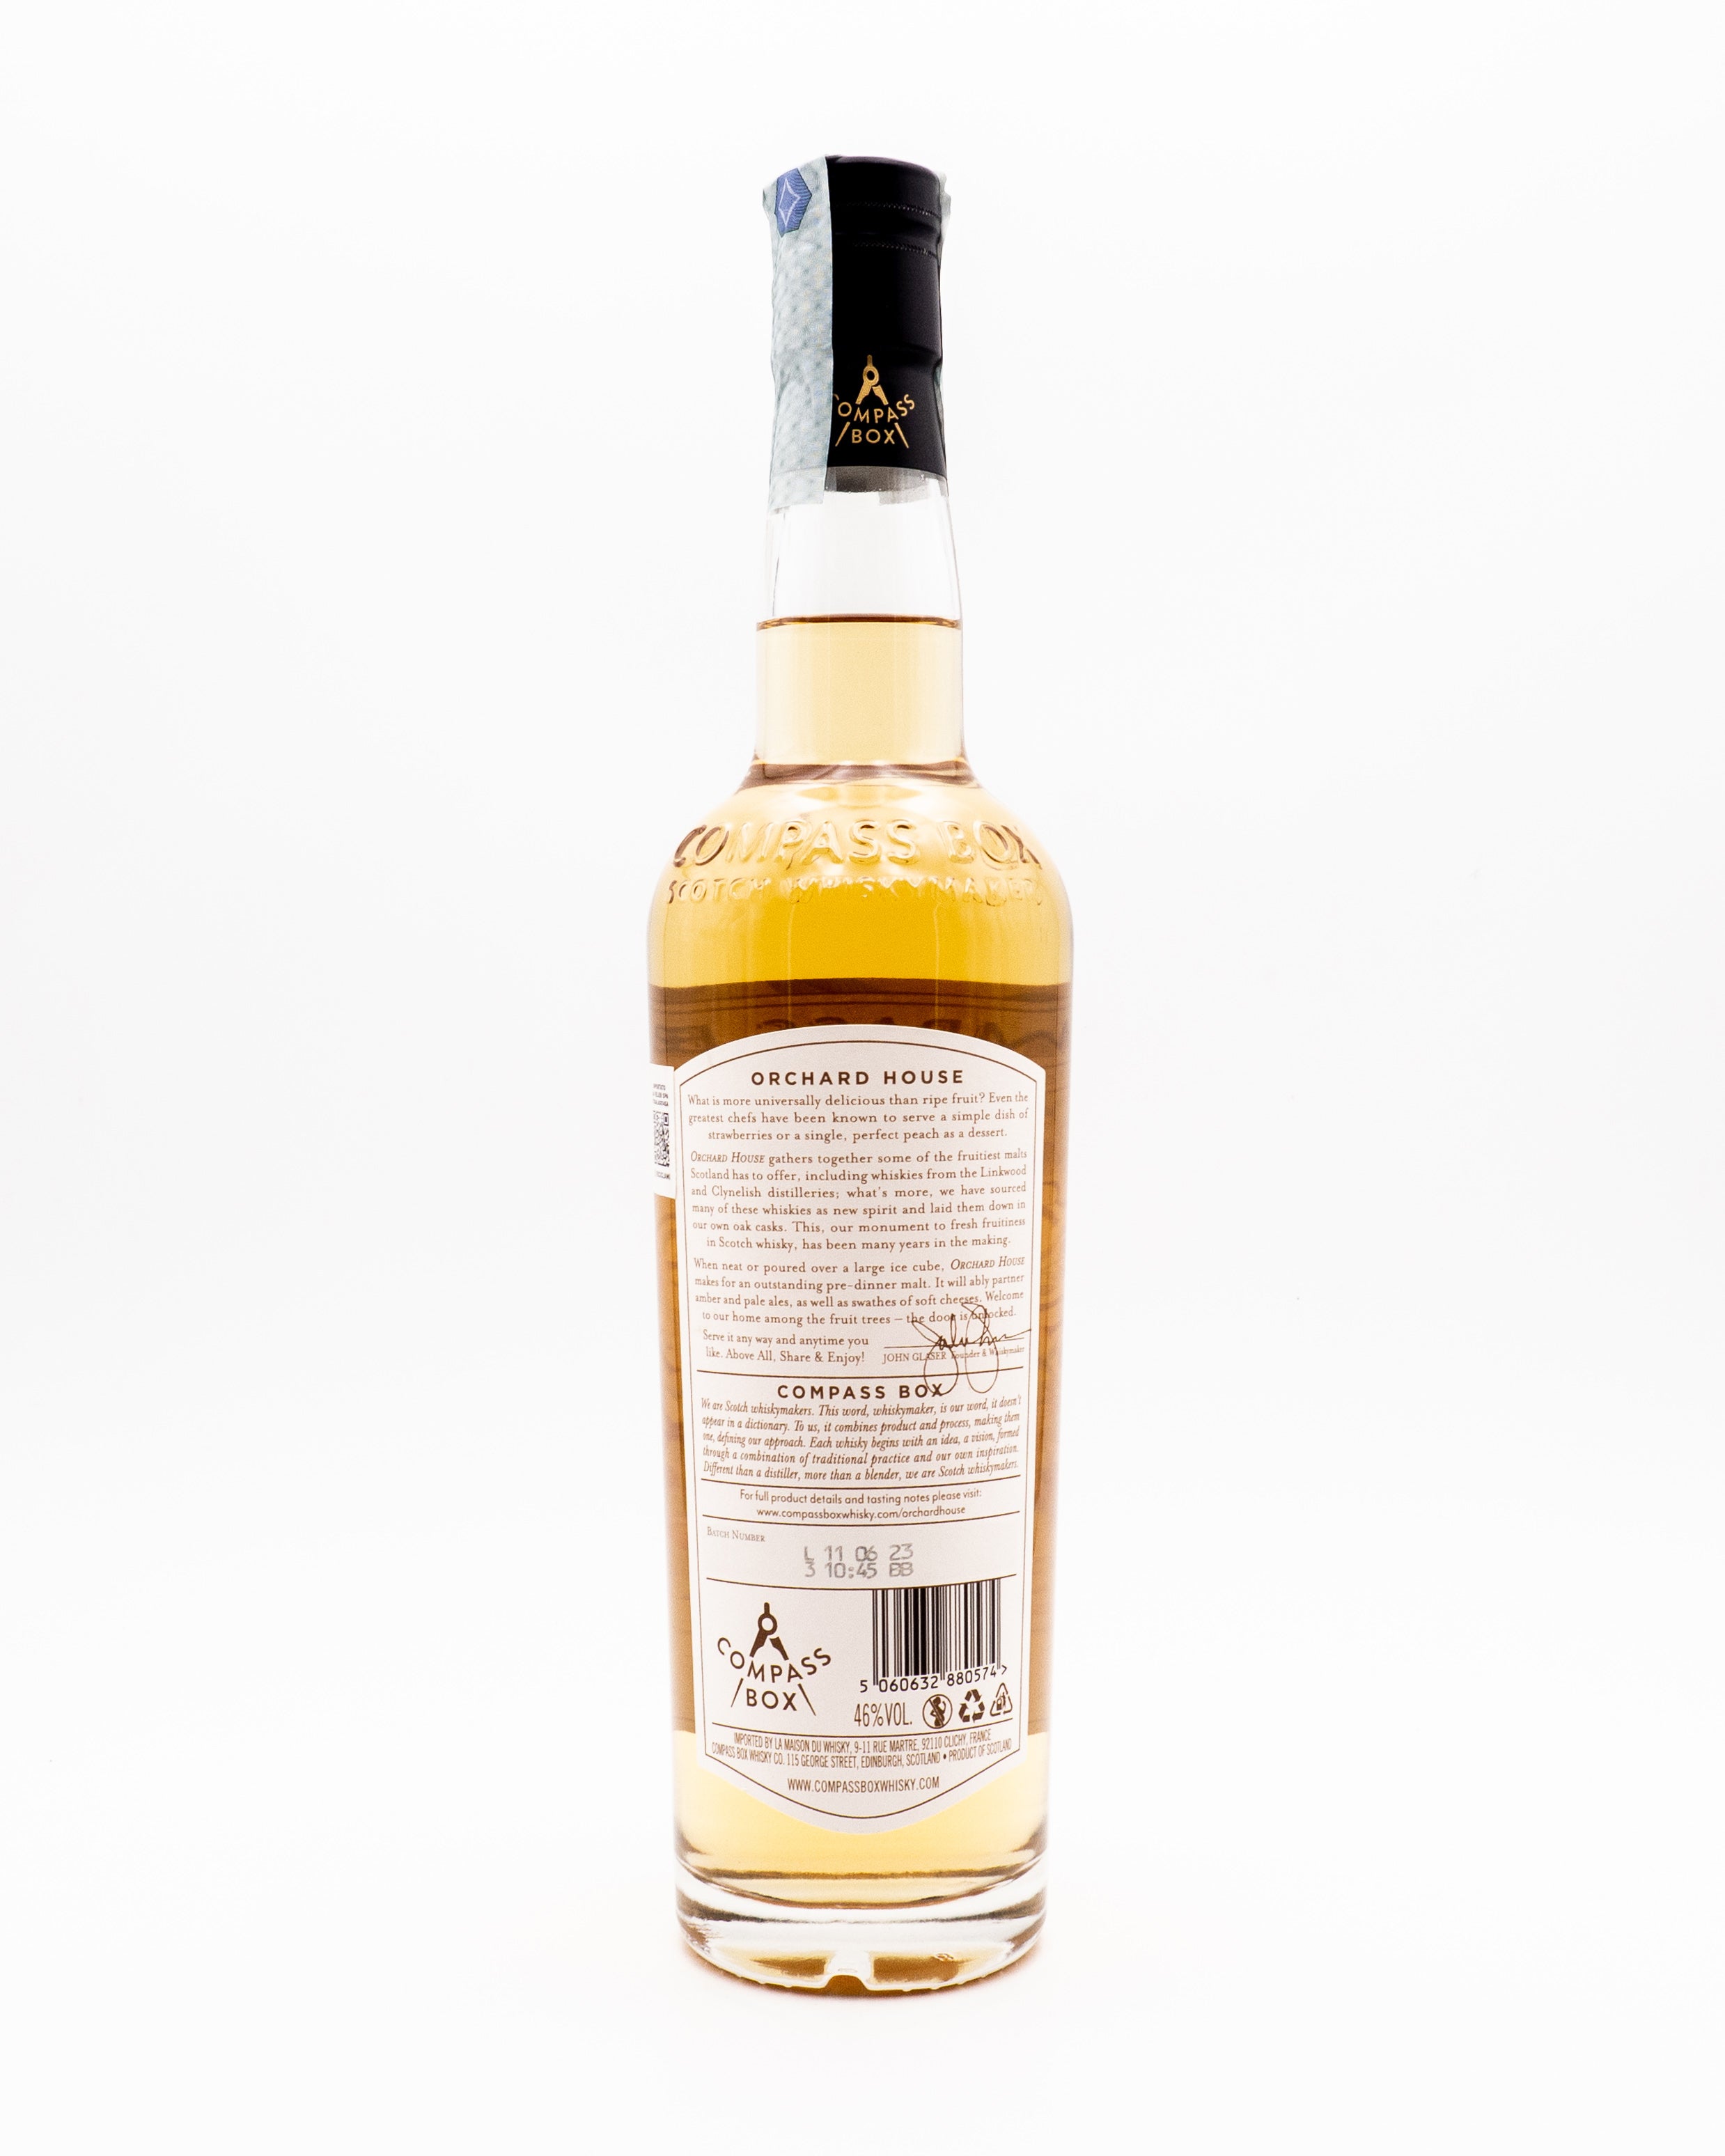 Scotch Whisky Orchard House - Compass Box